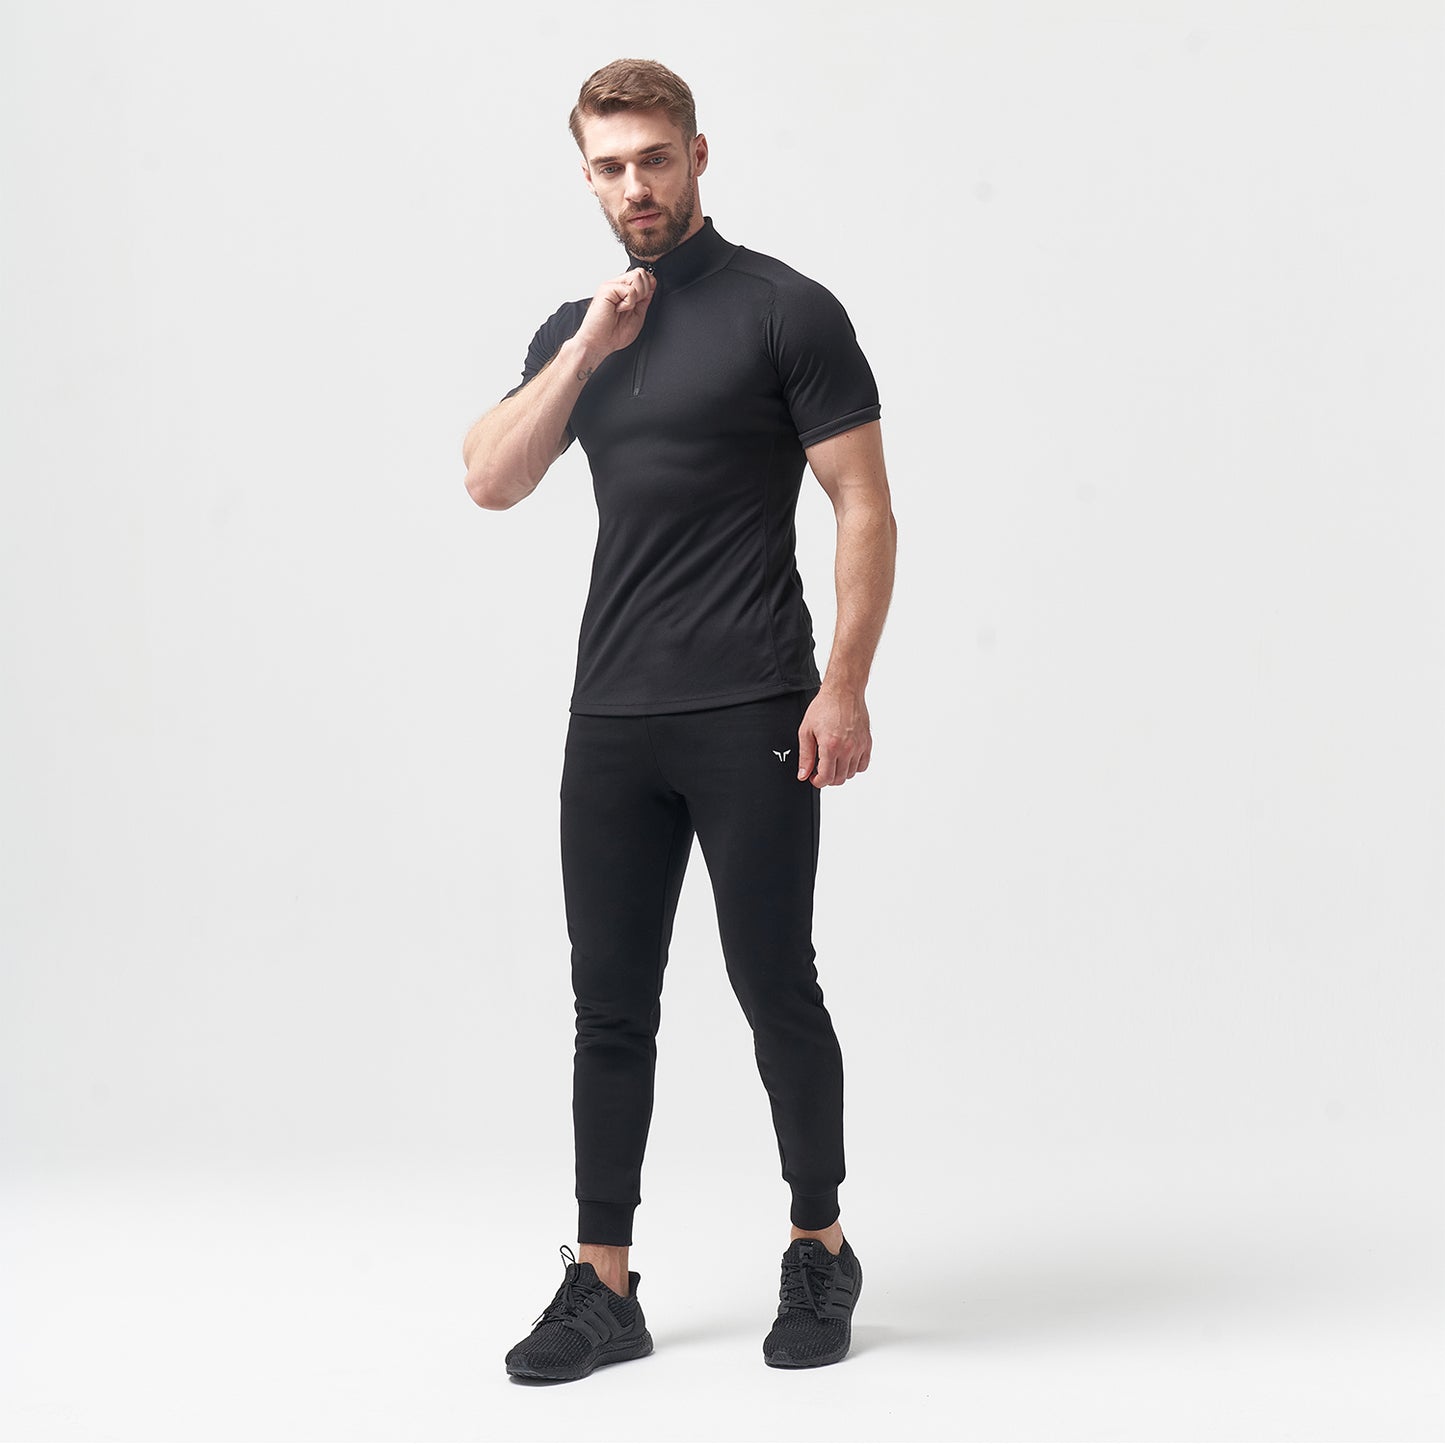 squatwolf-gym-wear-code-zip-up-tee-black-workout-shirts-for-men